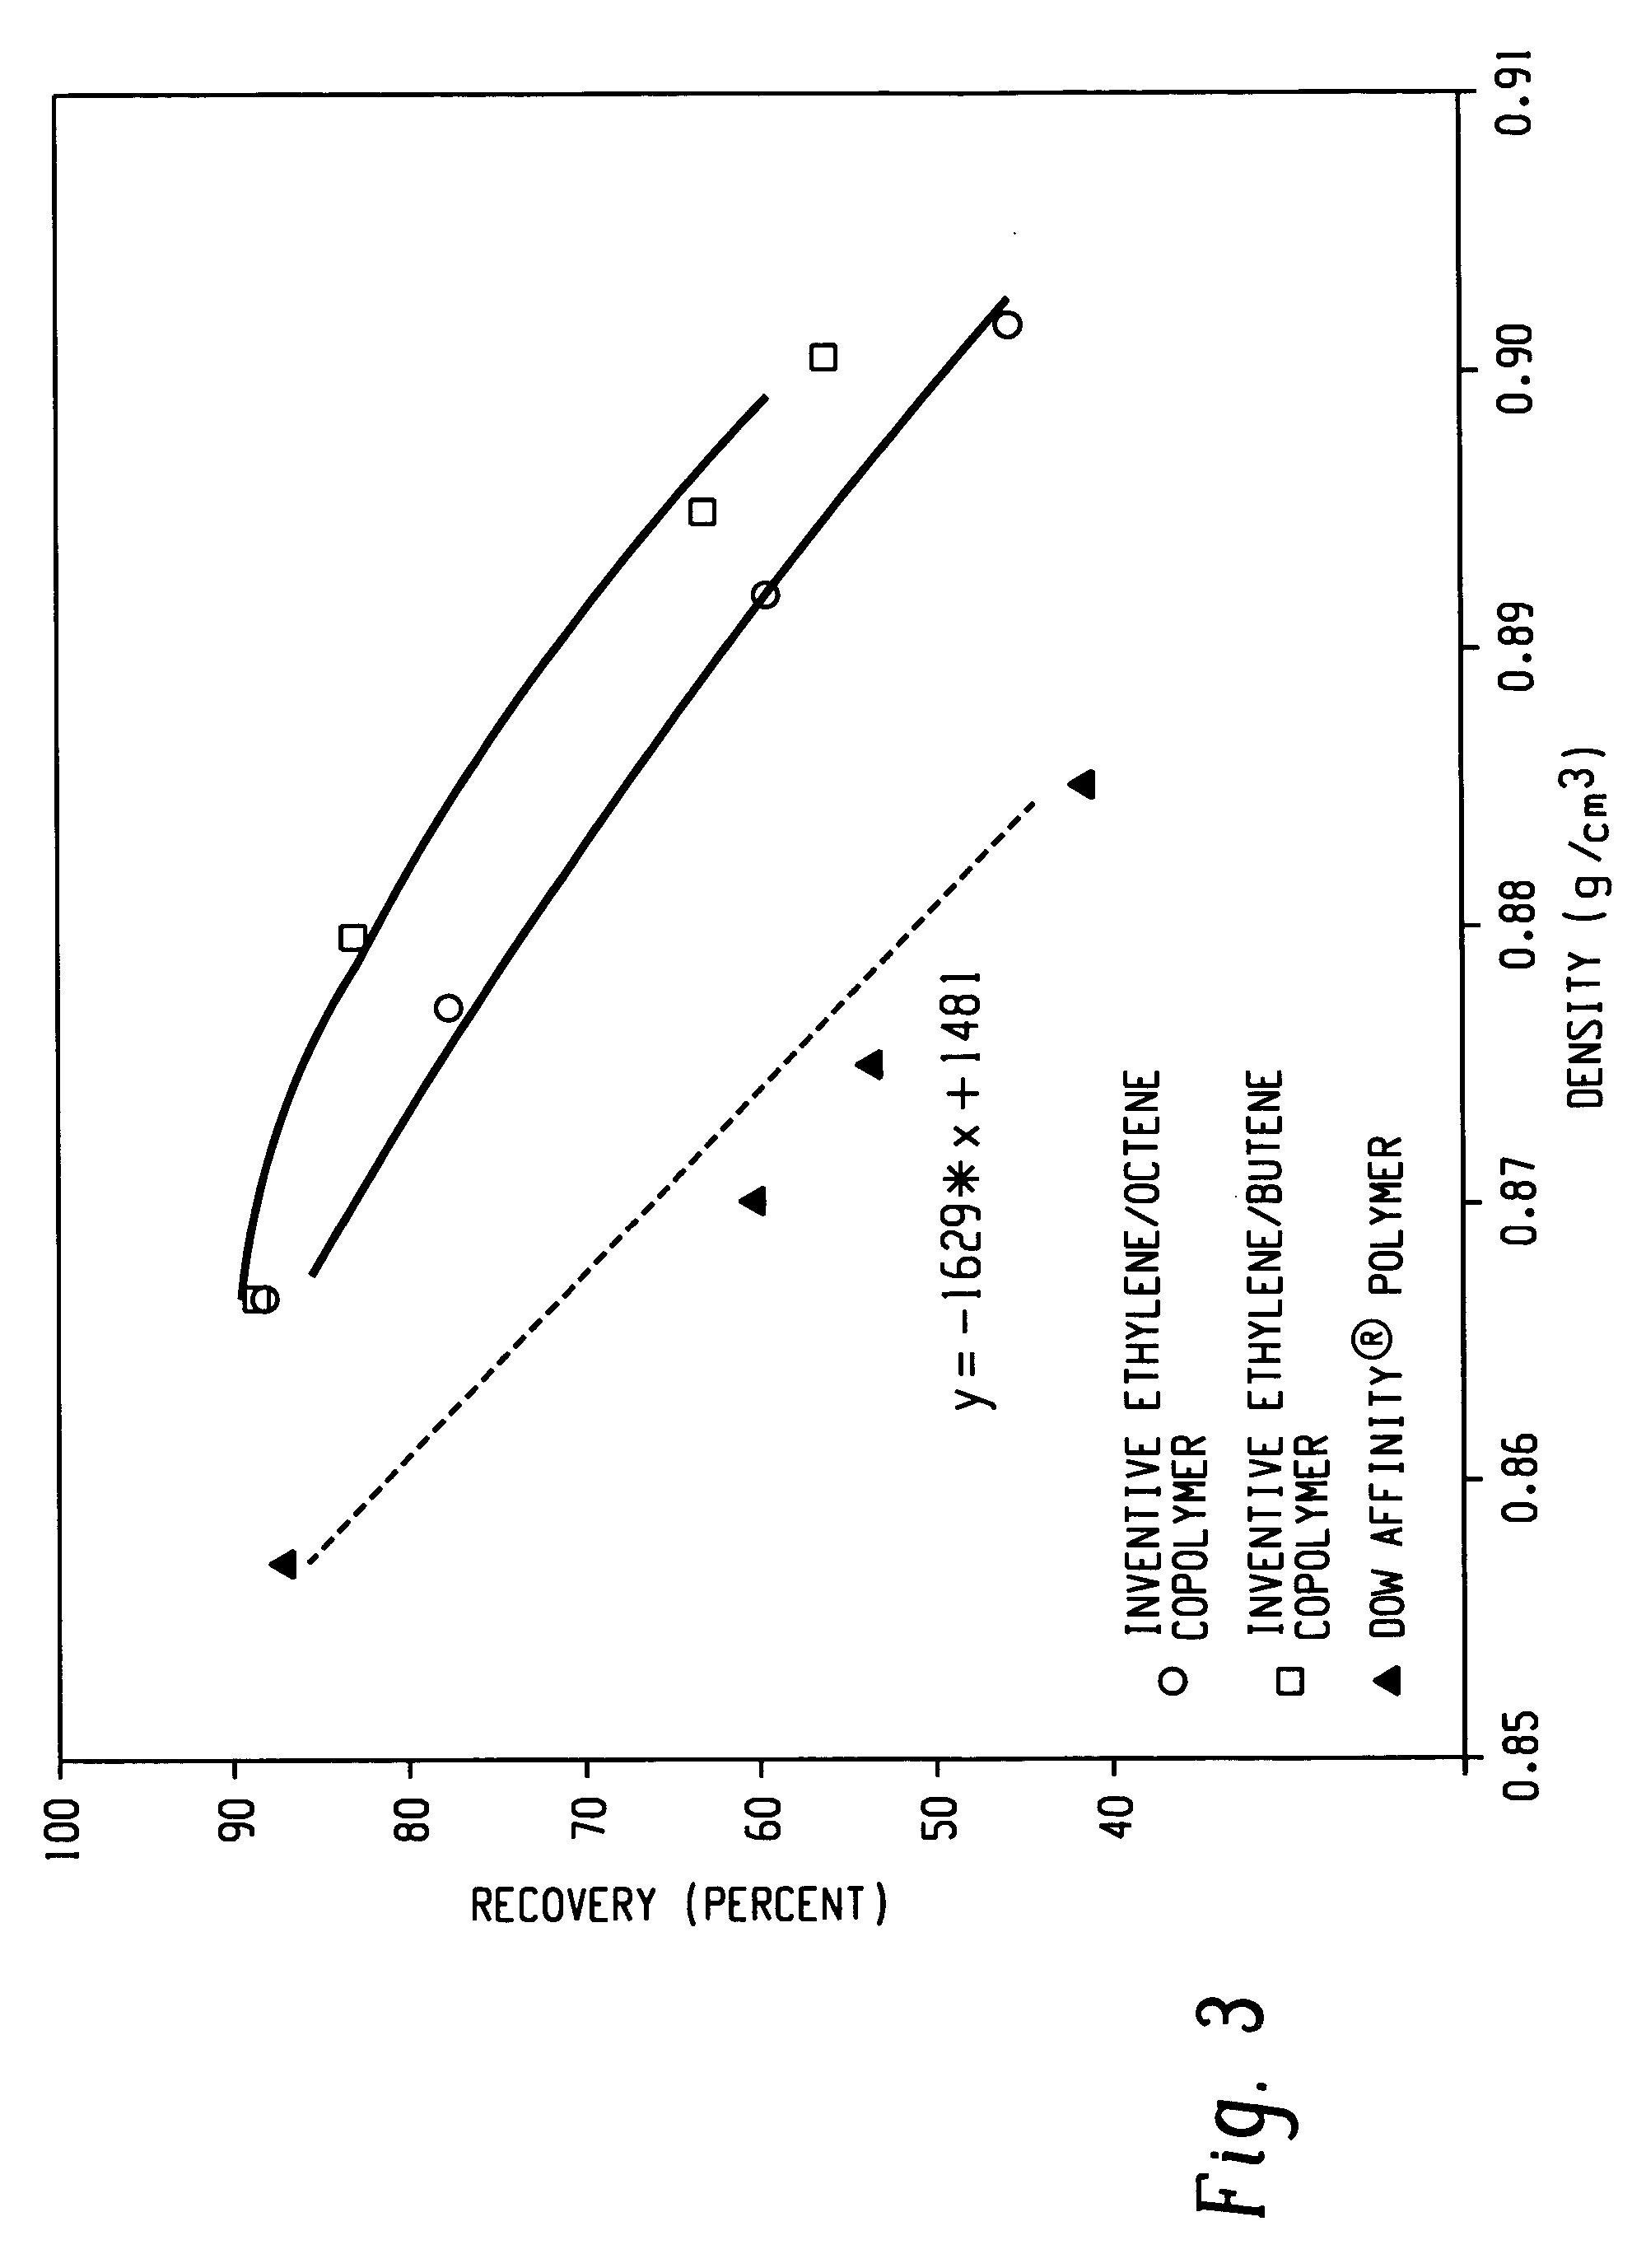 Anti-blocking compositions comprising interpolymers of ethylene/alpha-olefins